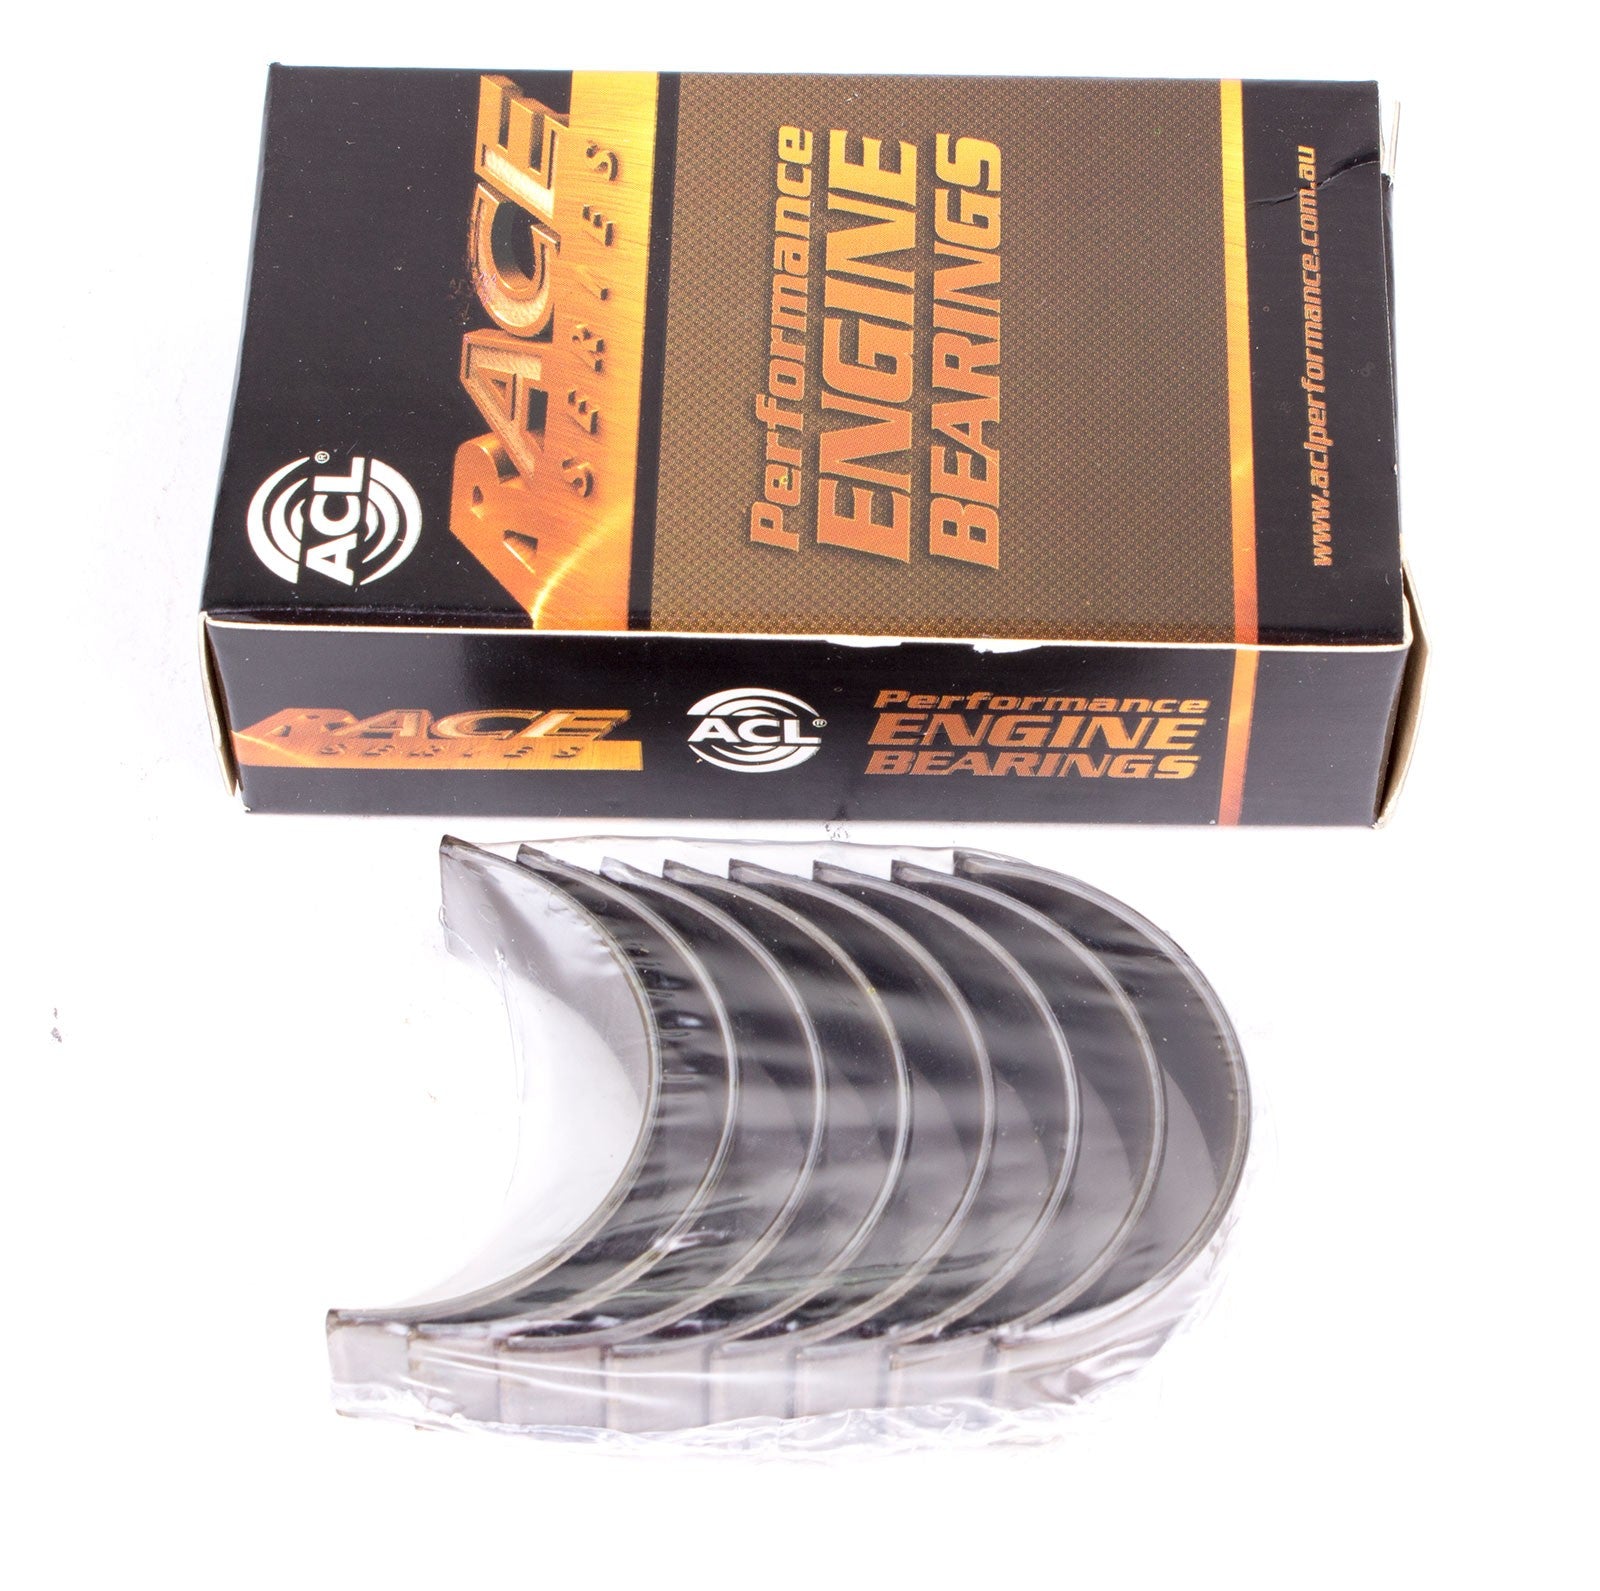 ACL 4M2273H-.25 Main bearing set (ACL Race Series) Photo-0 